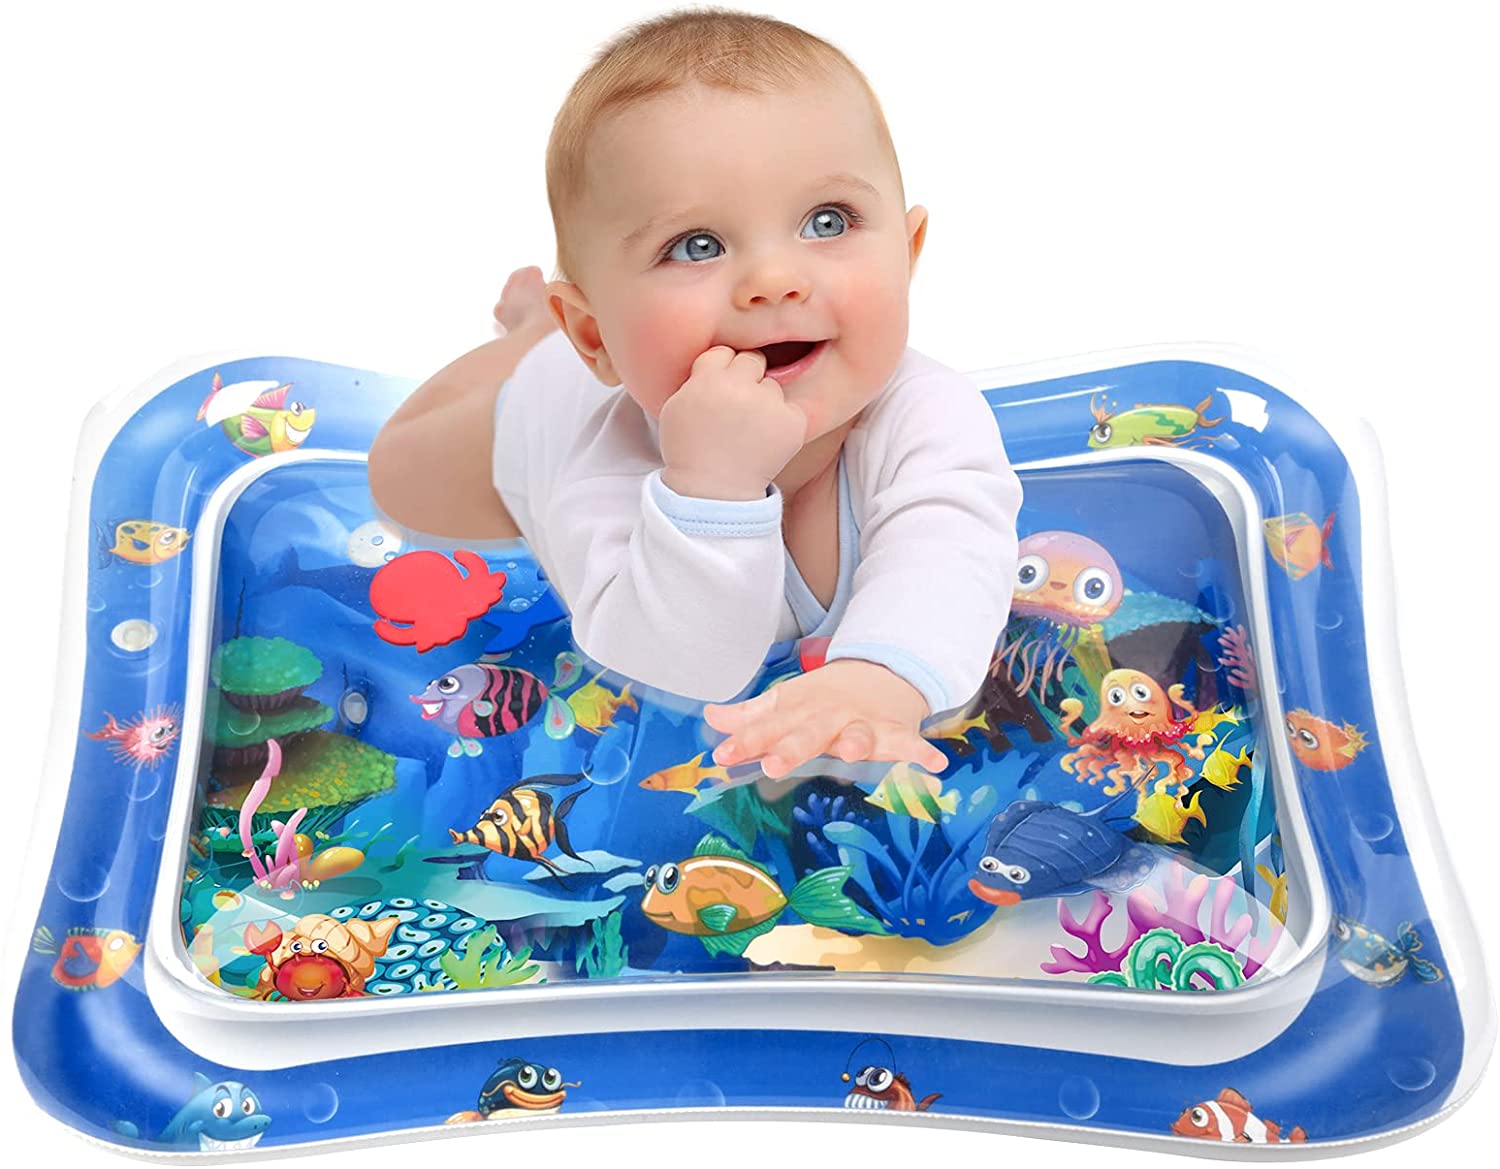 Splashin'kids Inflatable Tummy Time Premium Water Mat Infants and Toddlers Is